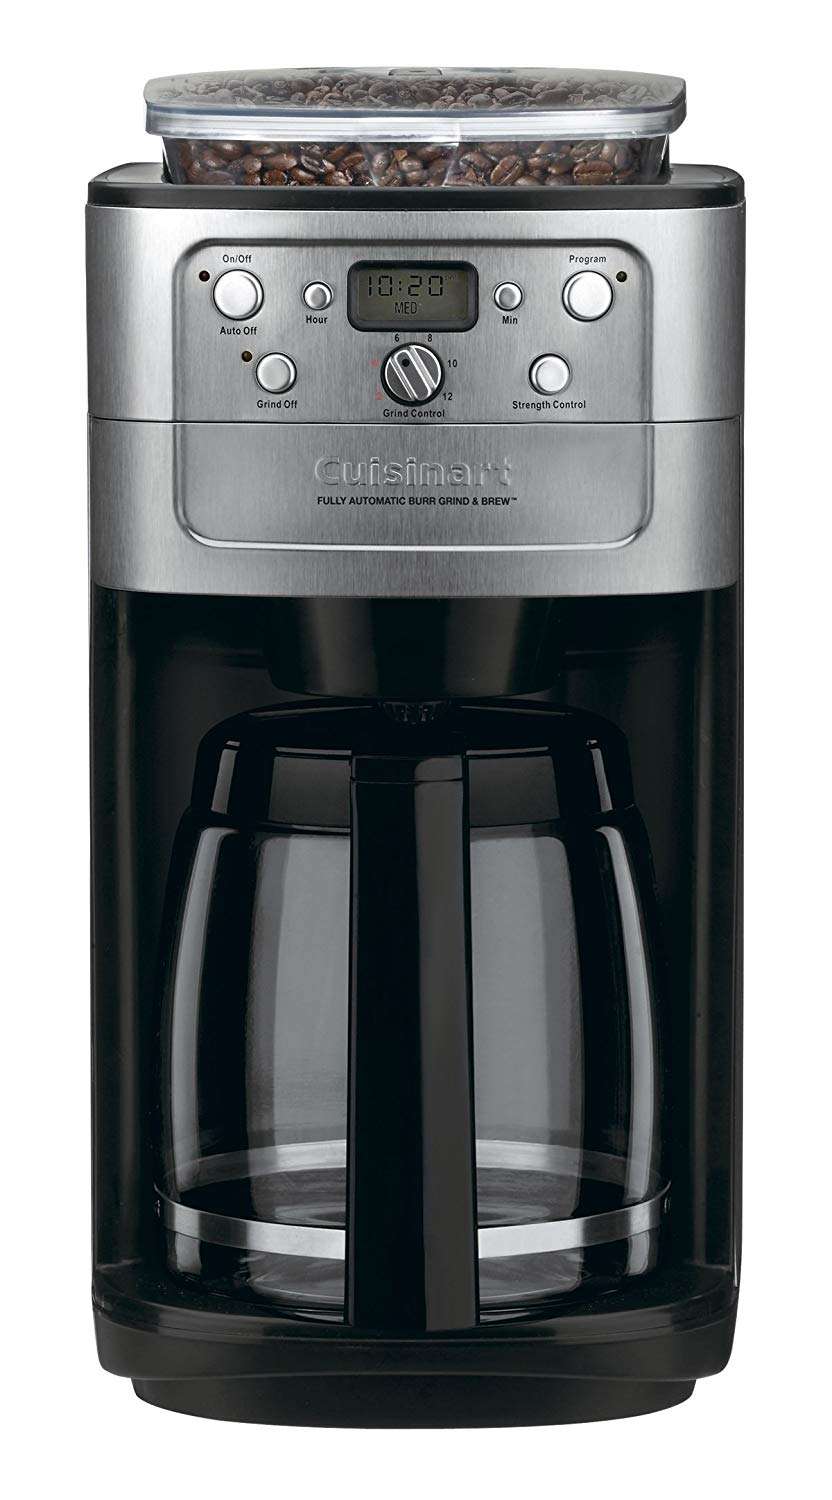 Best grind and brew coffee maker Reviews